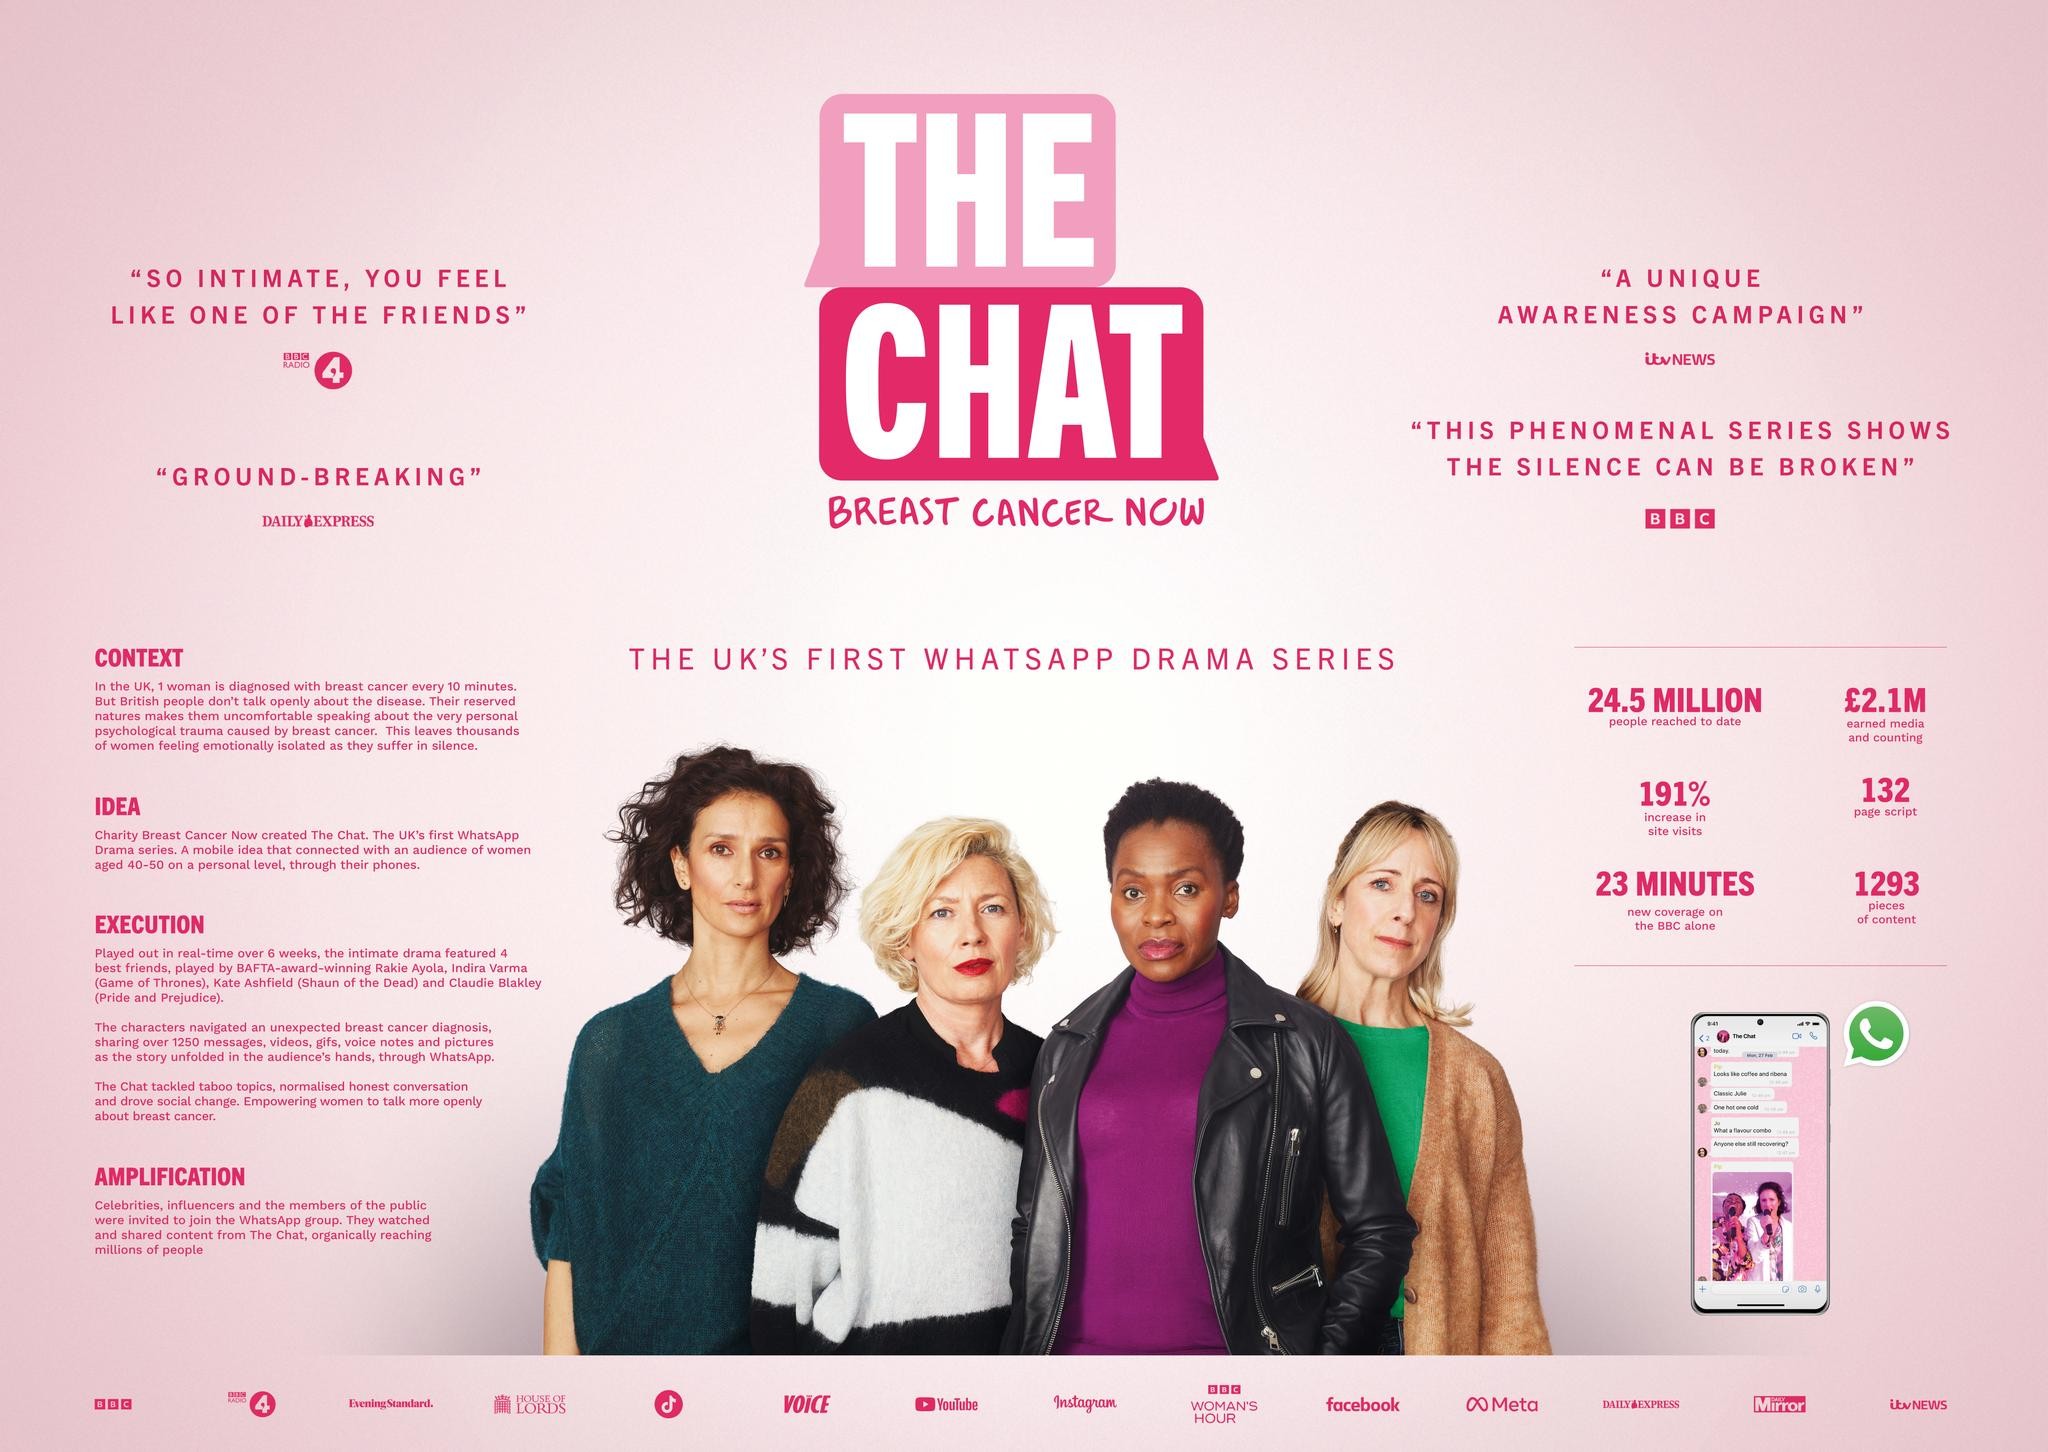 THE CHAT